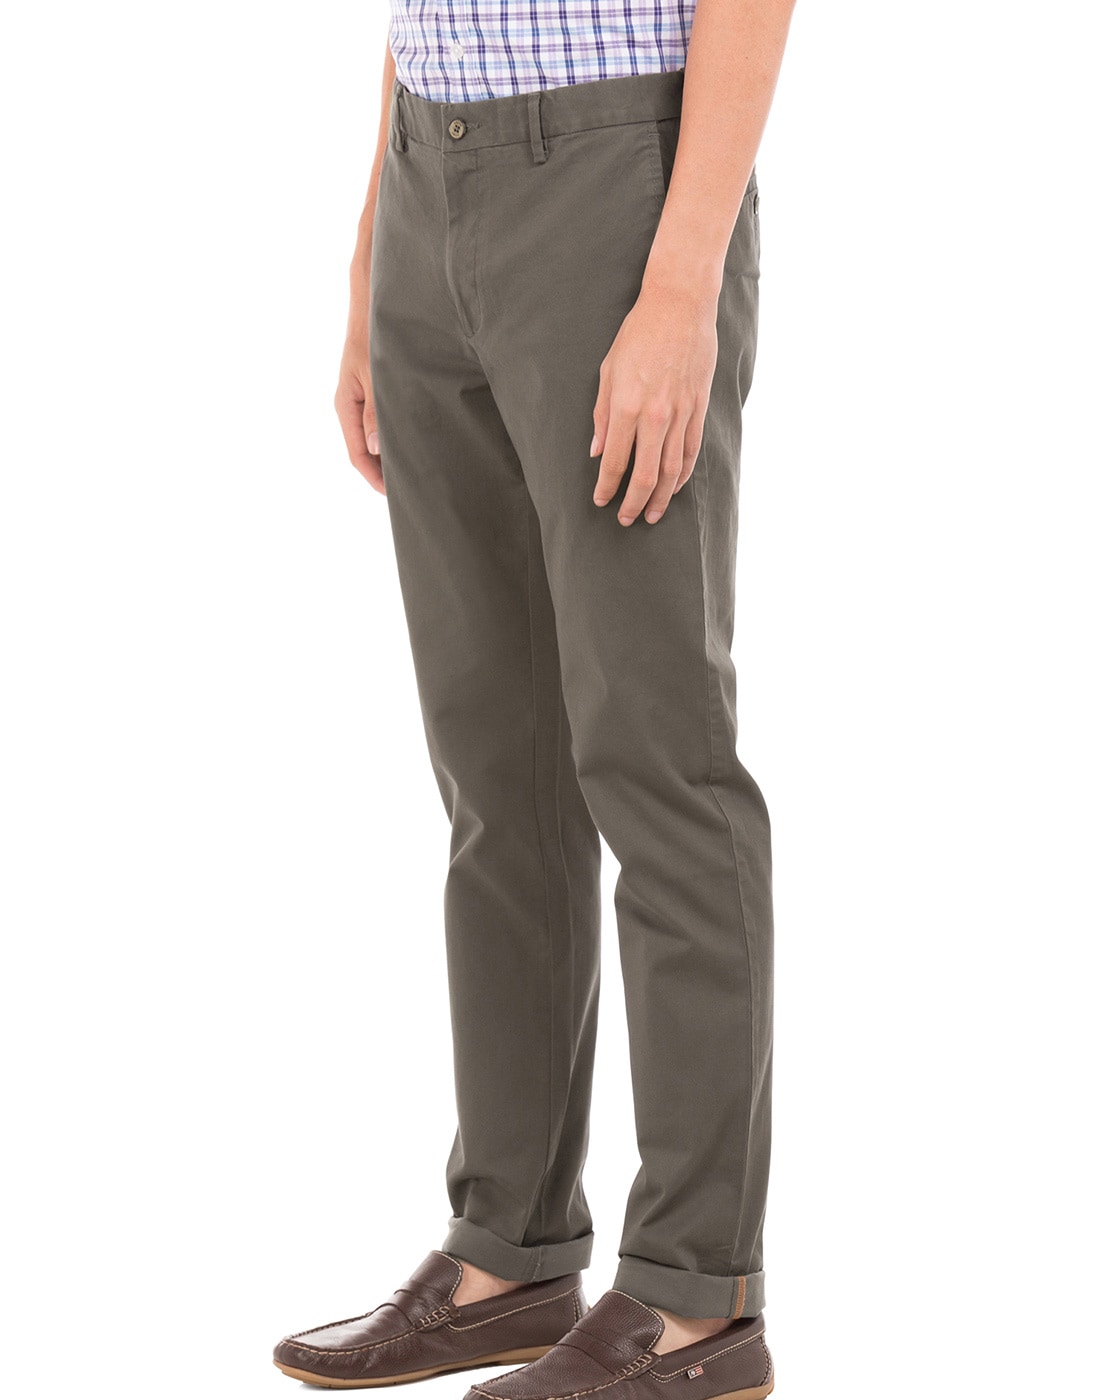 Buy Mens Elasticated Waist Trousers  Fast UK Delivery  Insight Clothing